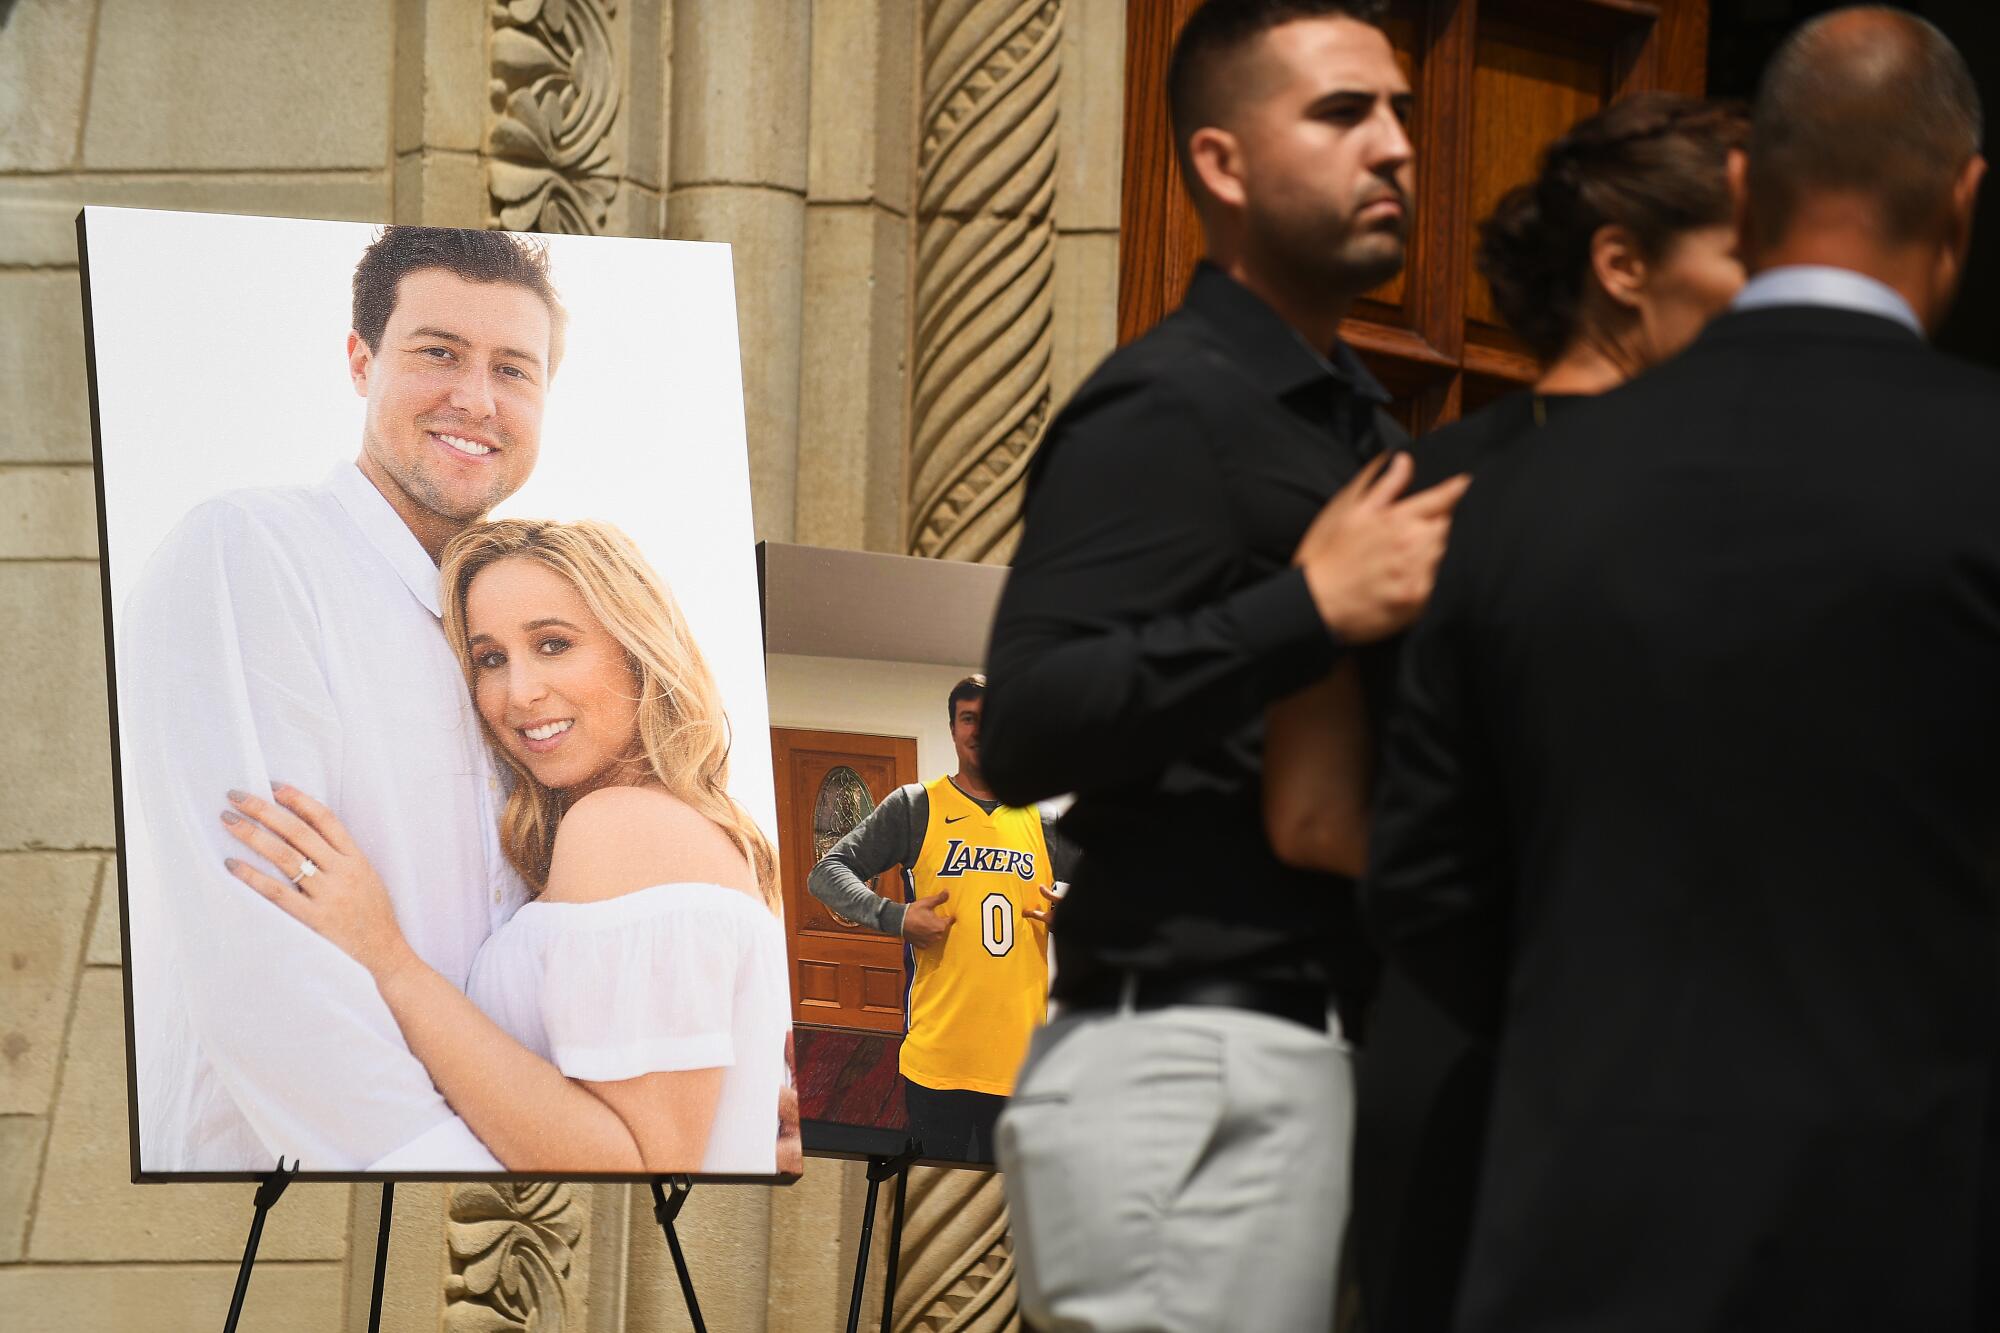 A large photo of Tyler Skaggs and his wife, Carli, is displayed on an easel beside mourners in black at a memorial service